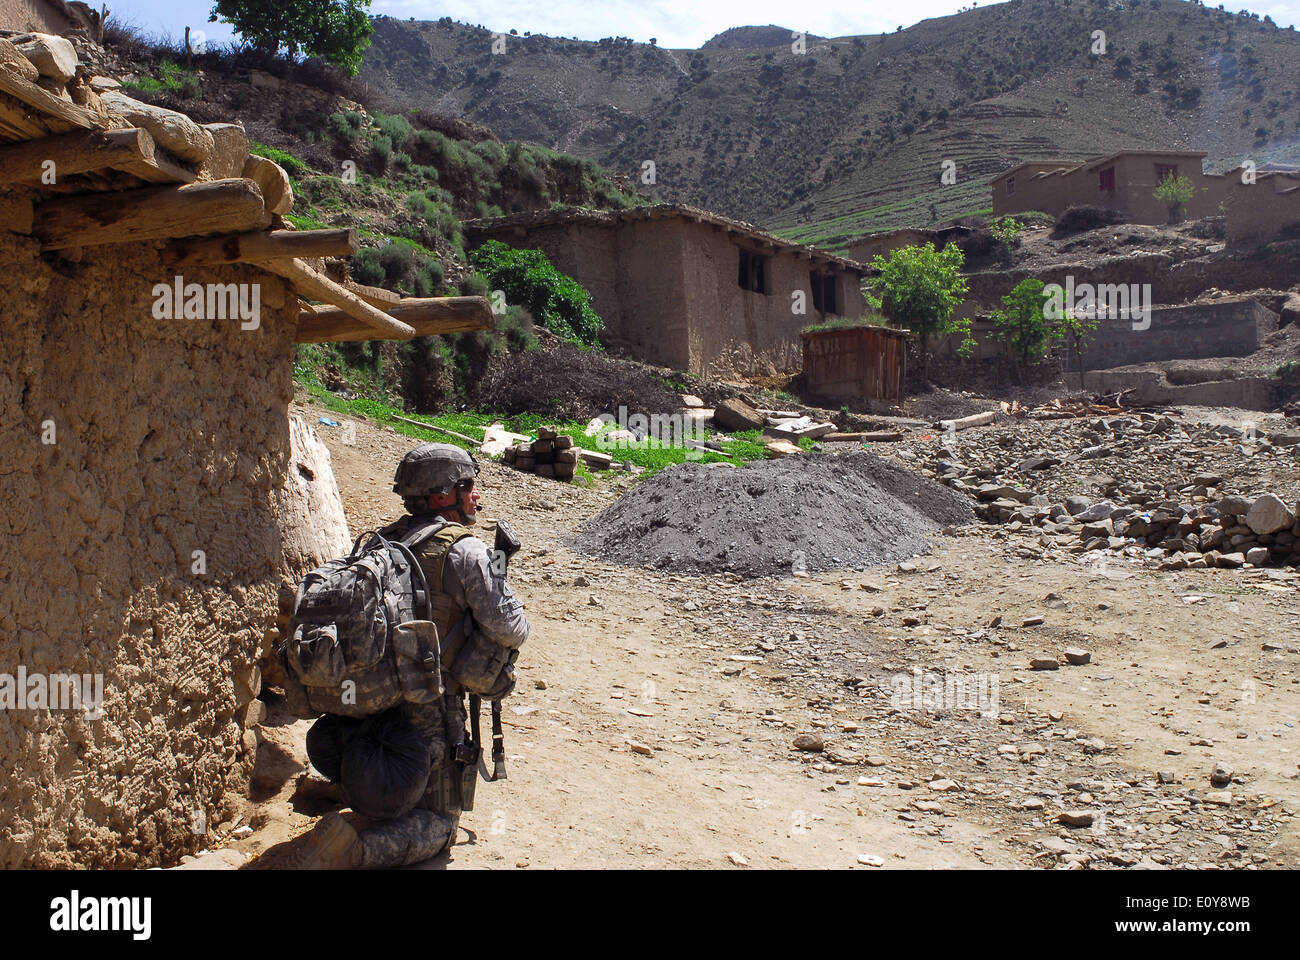 US Army Staff Sgt. Jean-Francois Frenette keeps watch during a mission in a mountain village April 19, 2009 in Kunar province, Afghanistan. Stock Photo